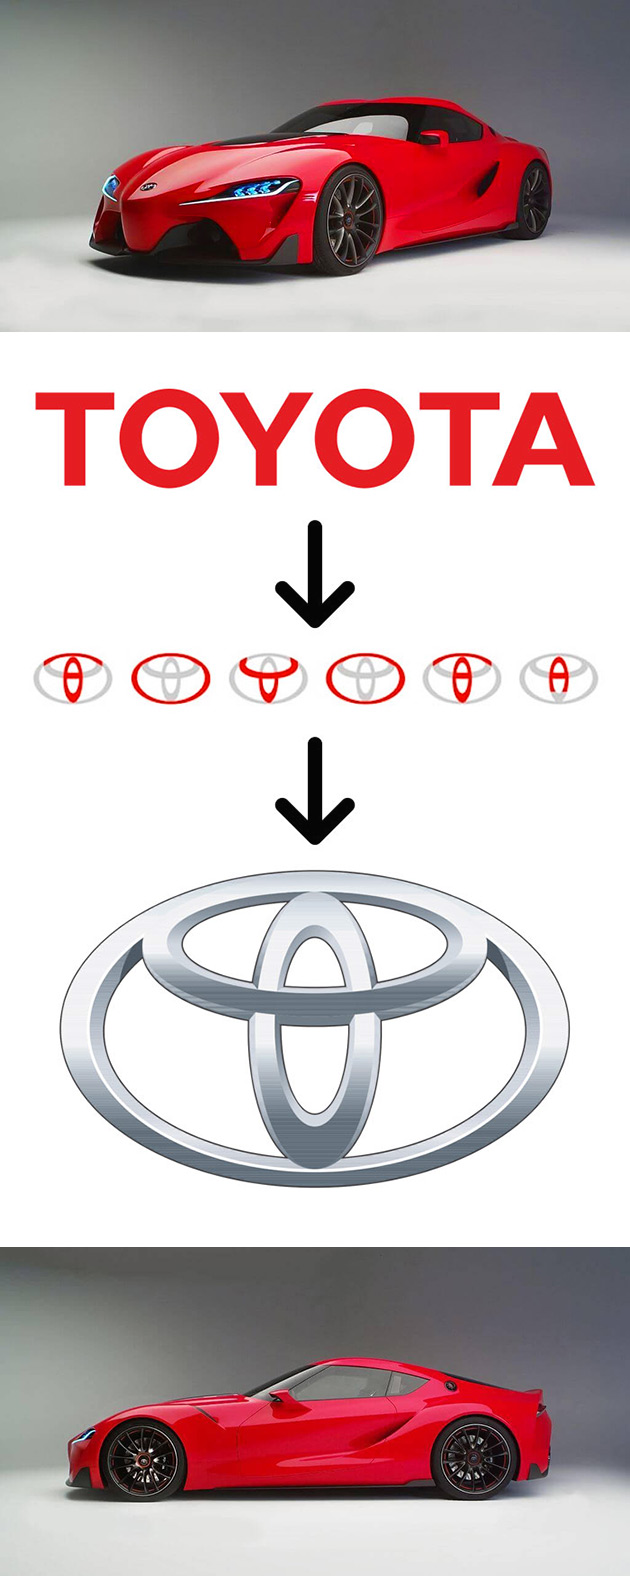 Toyota Spelled Out and 10 More Hidden Meanings in Famous Logos - TechEBlog